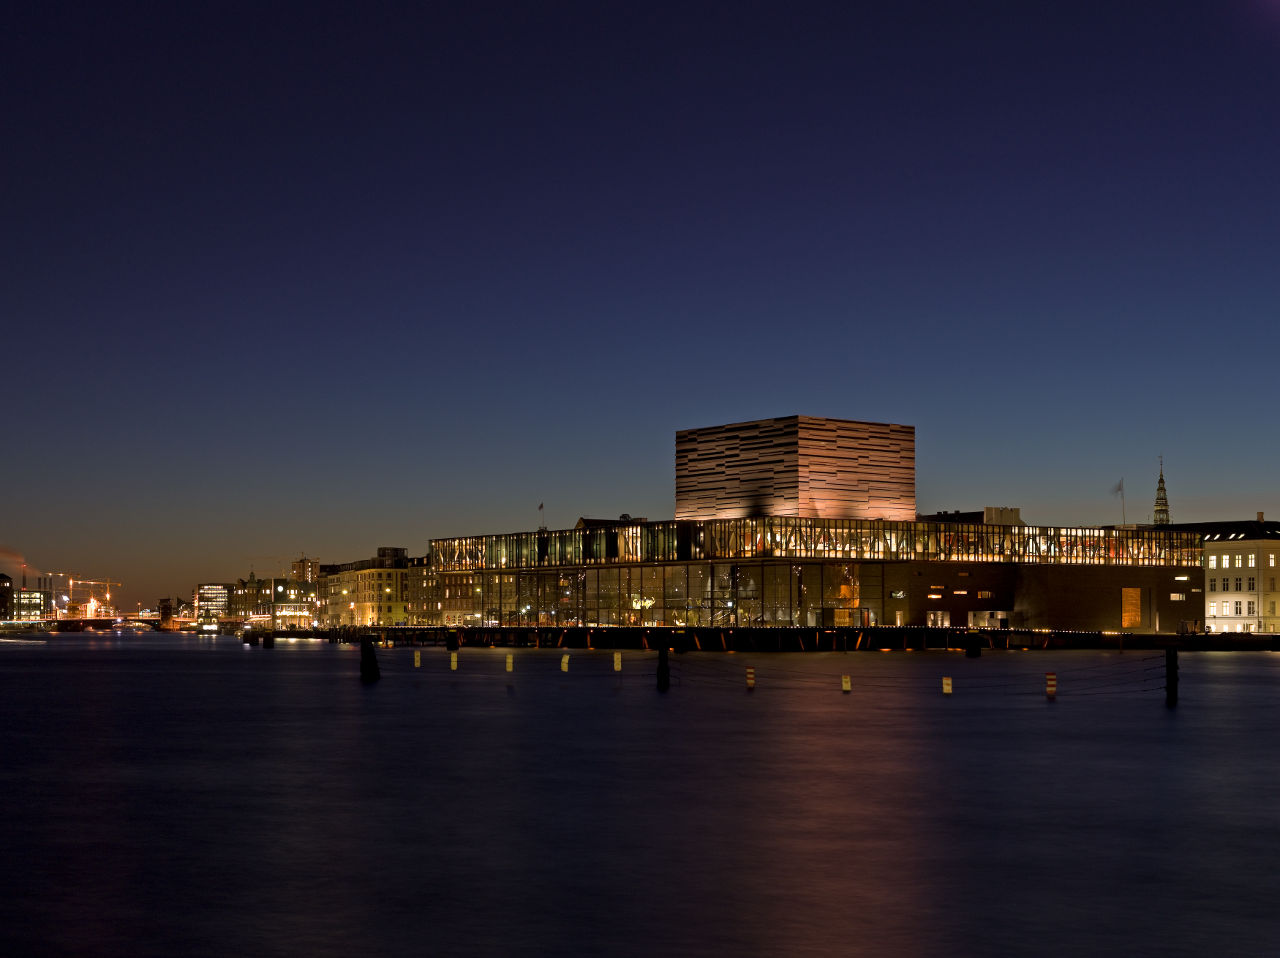 The New Royal Playhouse on the Copenhagen harbor designed by Danish firm Lundgaard and Tranberg Arkitekter